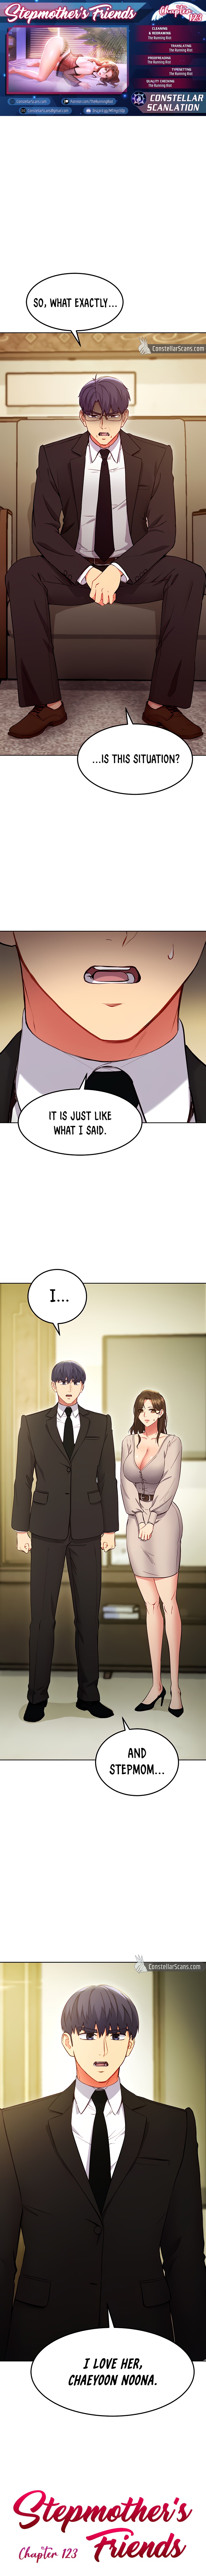 Panel Image 1 for chapter 123 of manhwa Stepmother